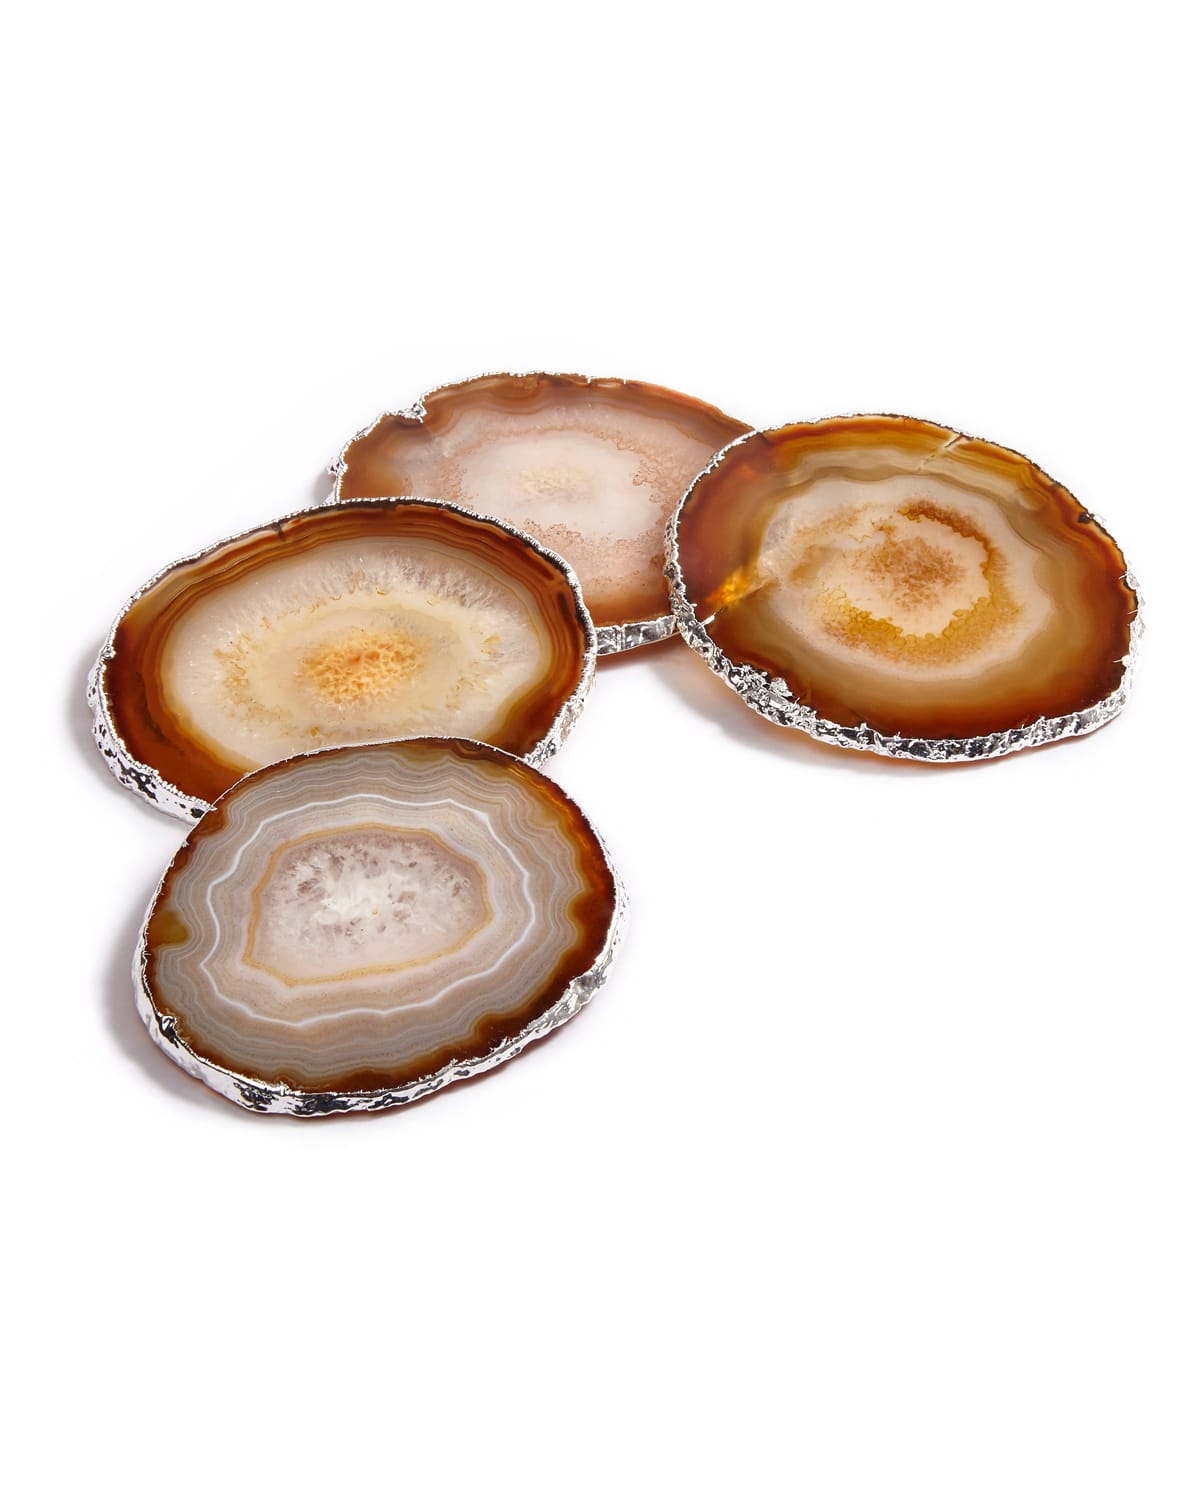 ANNA NEW YORK AGATE & SILVER COASTERS, SET OF 4